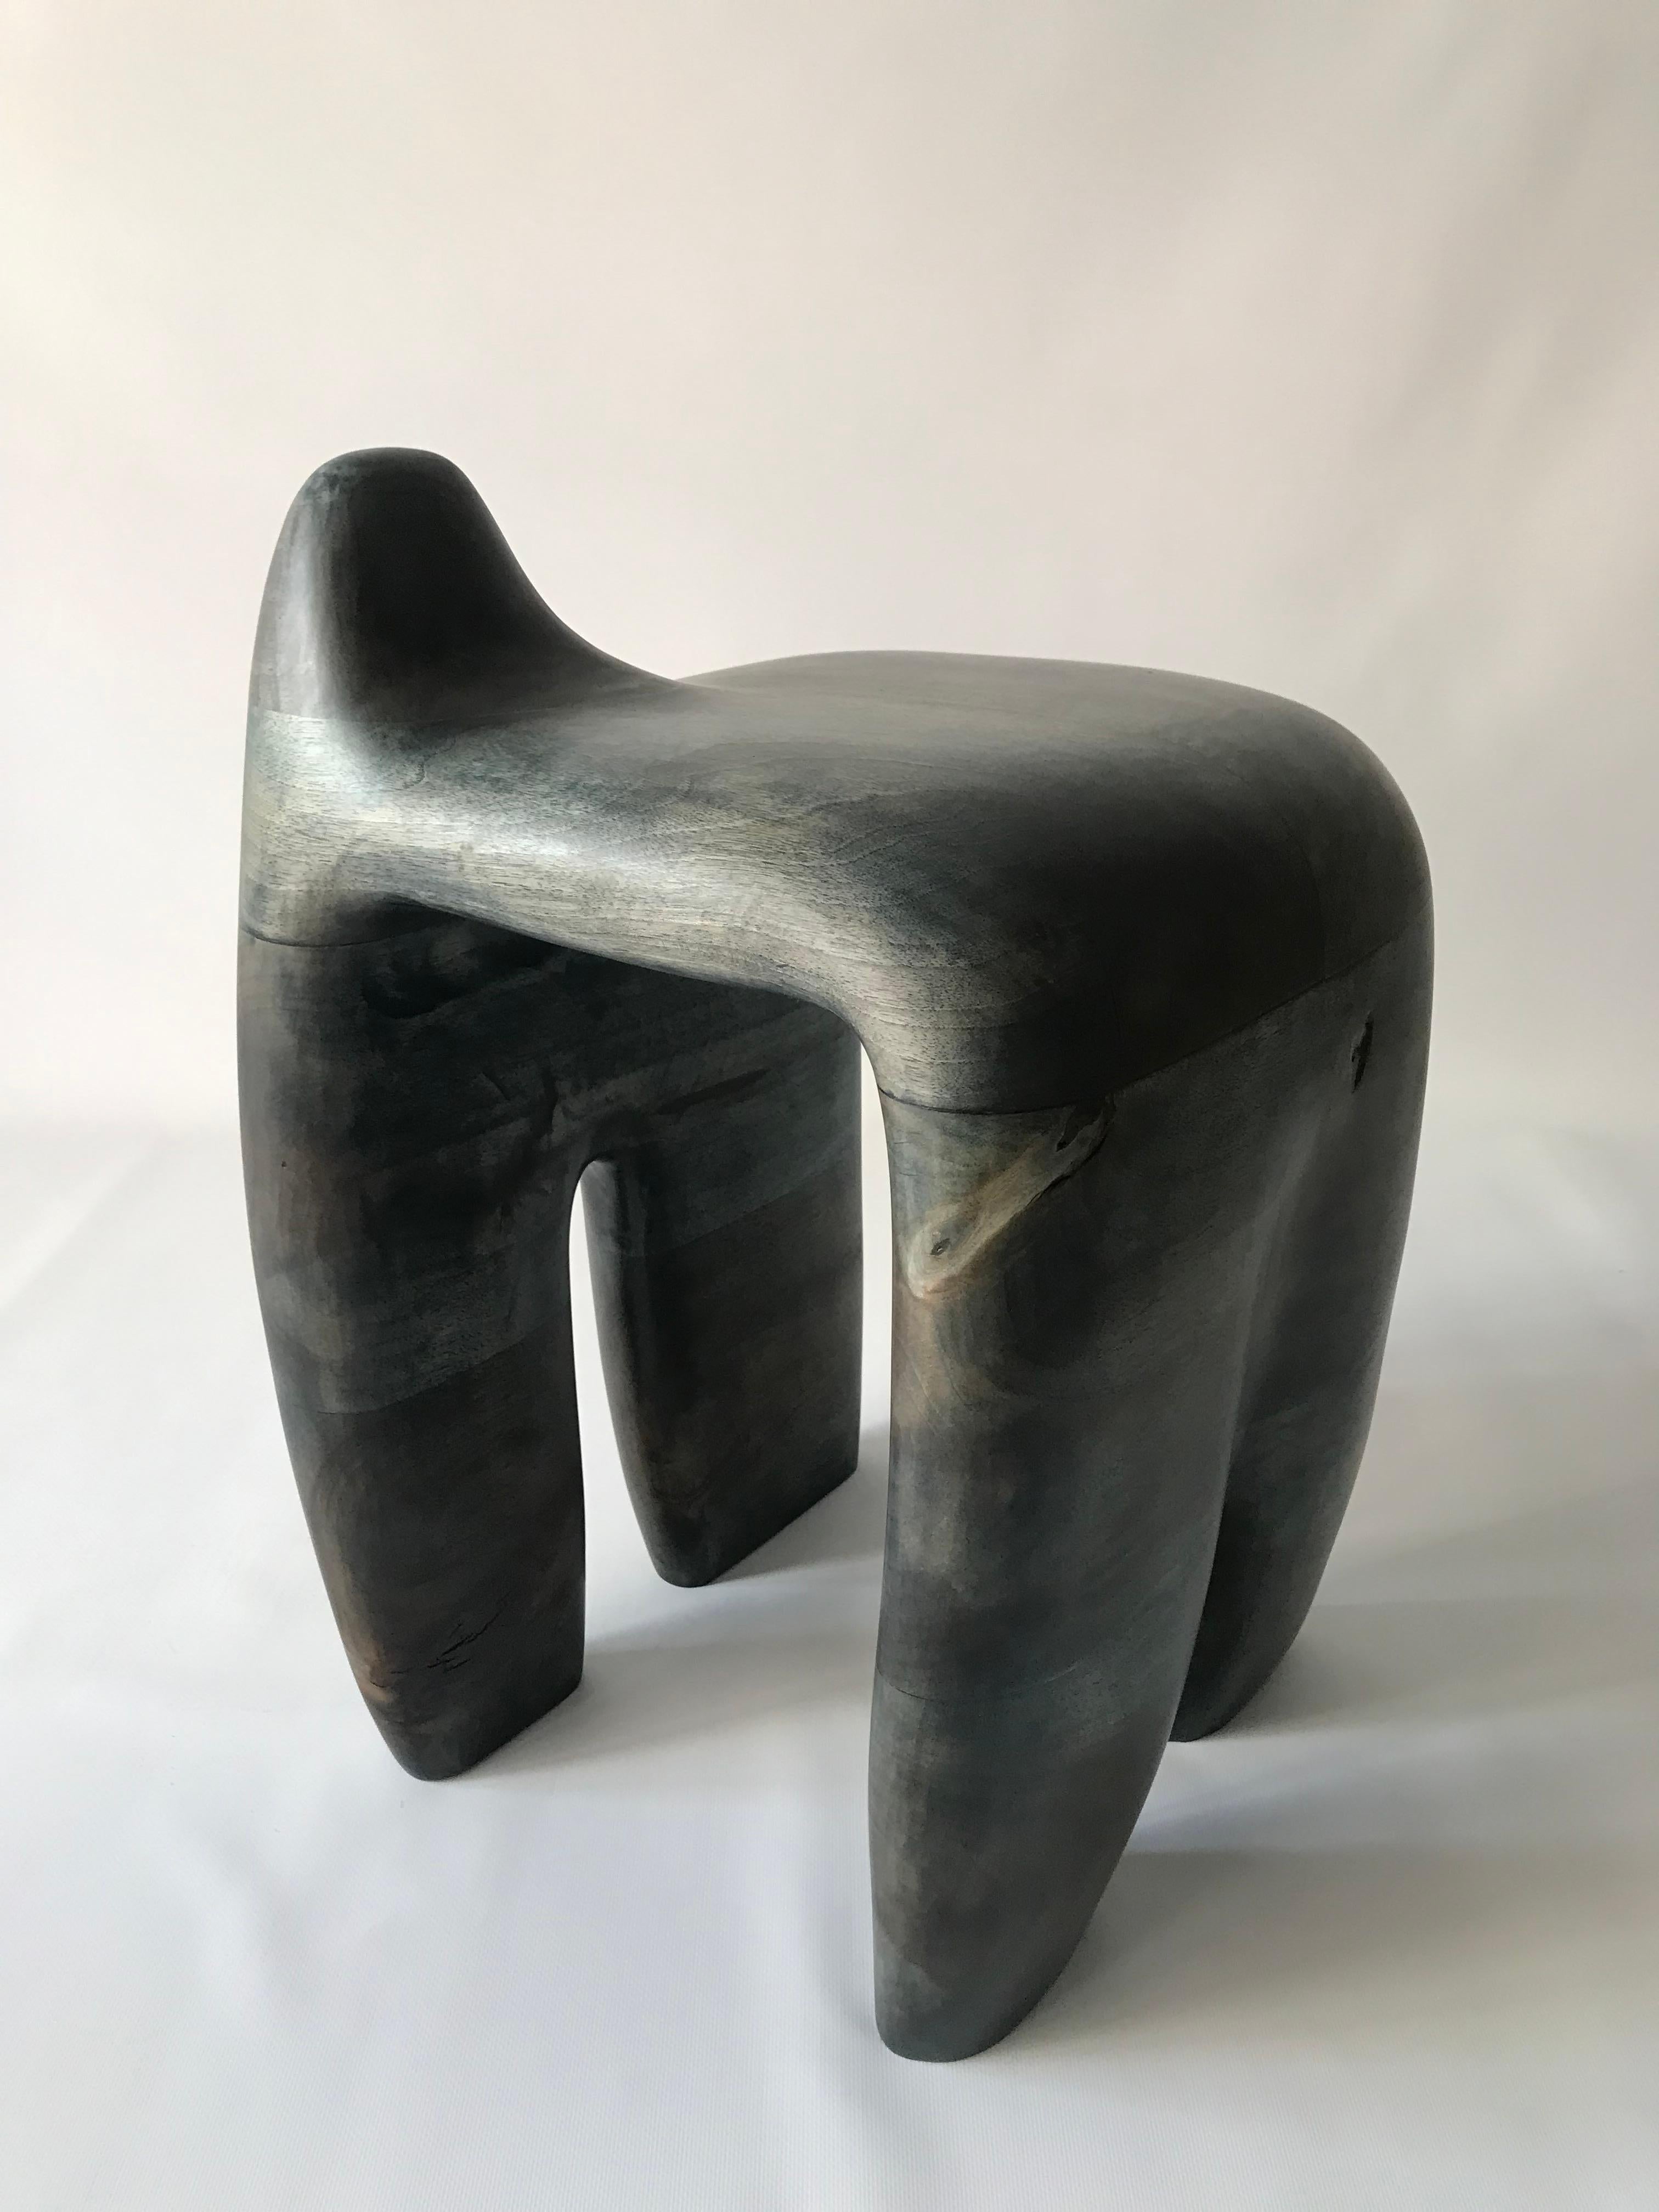 Jordi Sarrate is a product designer and sculptor based in Barcelona, Spain, and the third generation of furniture makers in his family.

The gallery presents 'Jeans' collection sculpted on Iberian walnut wood and finished with indigo blue patina.